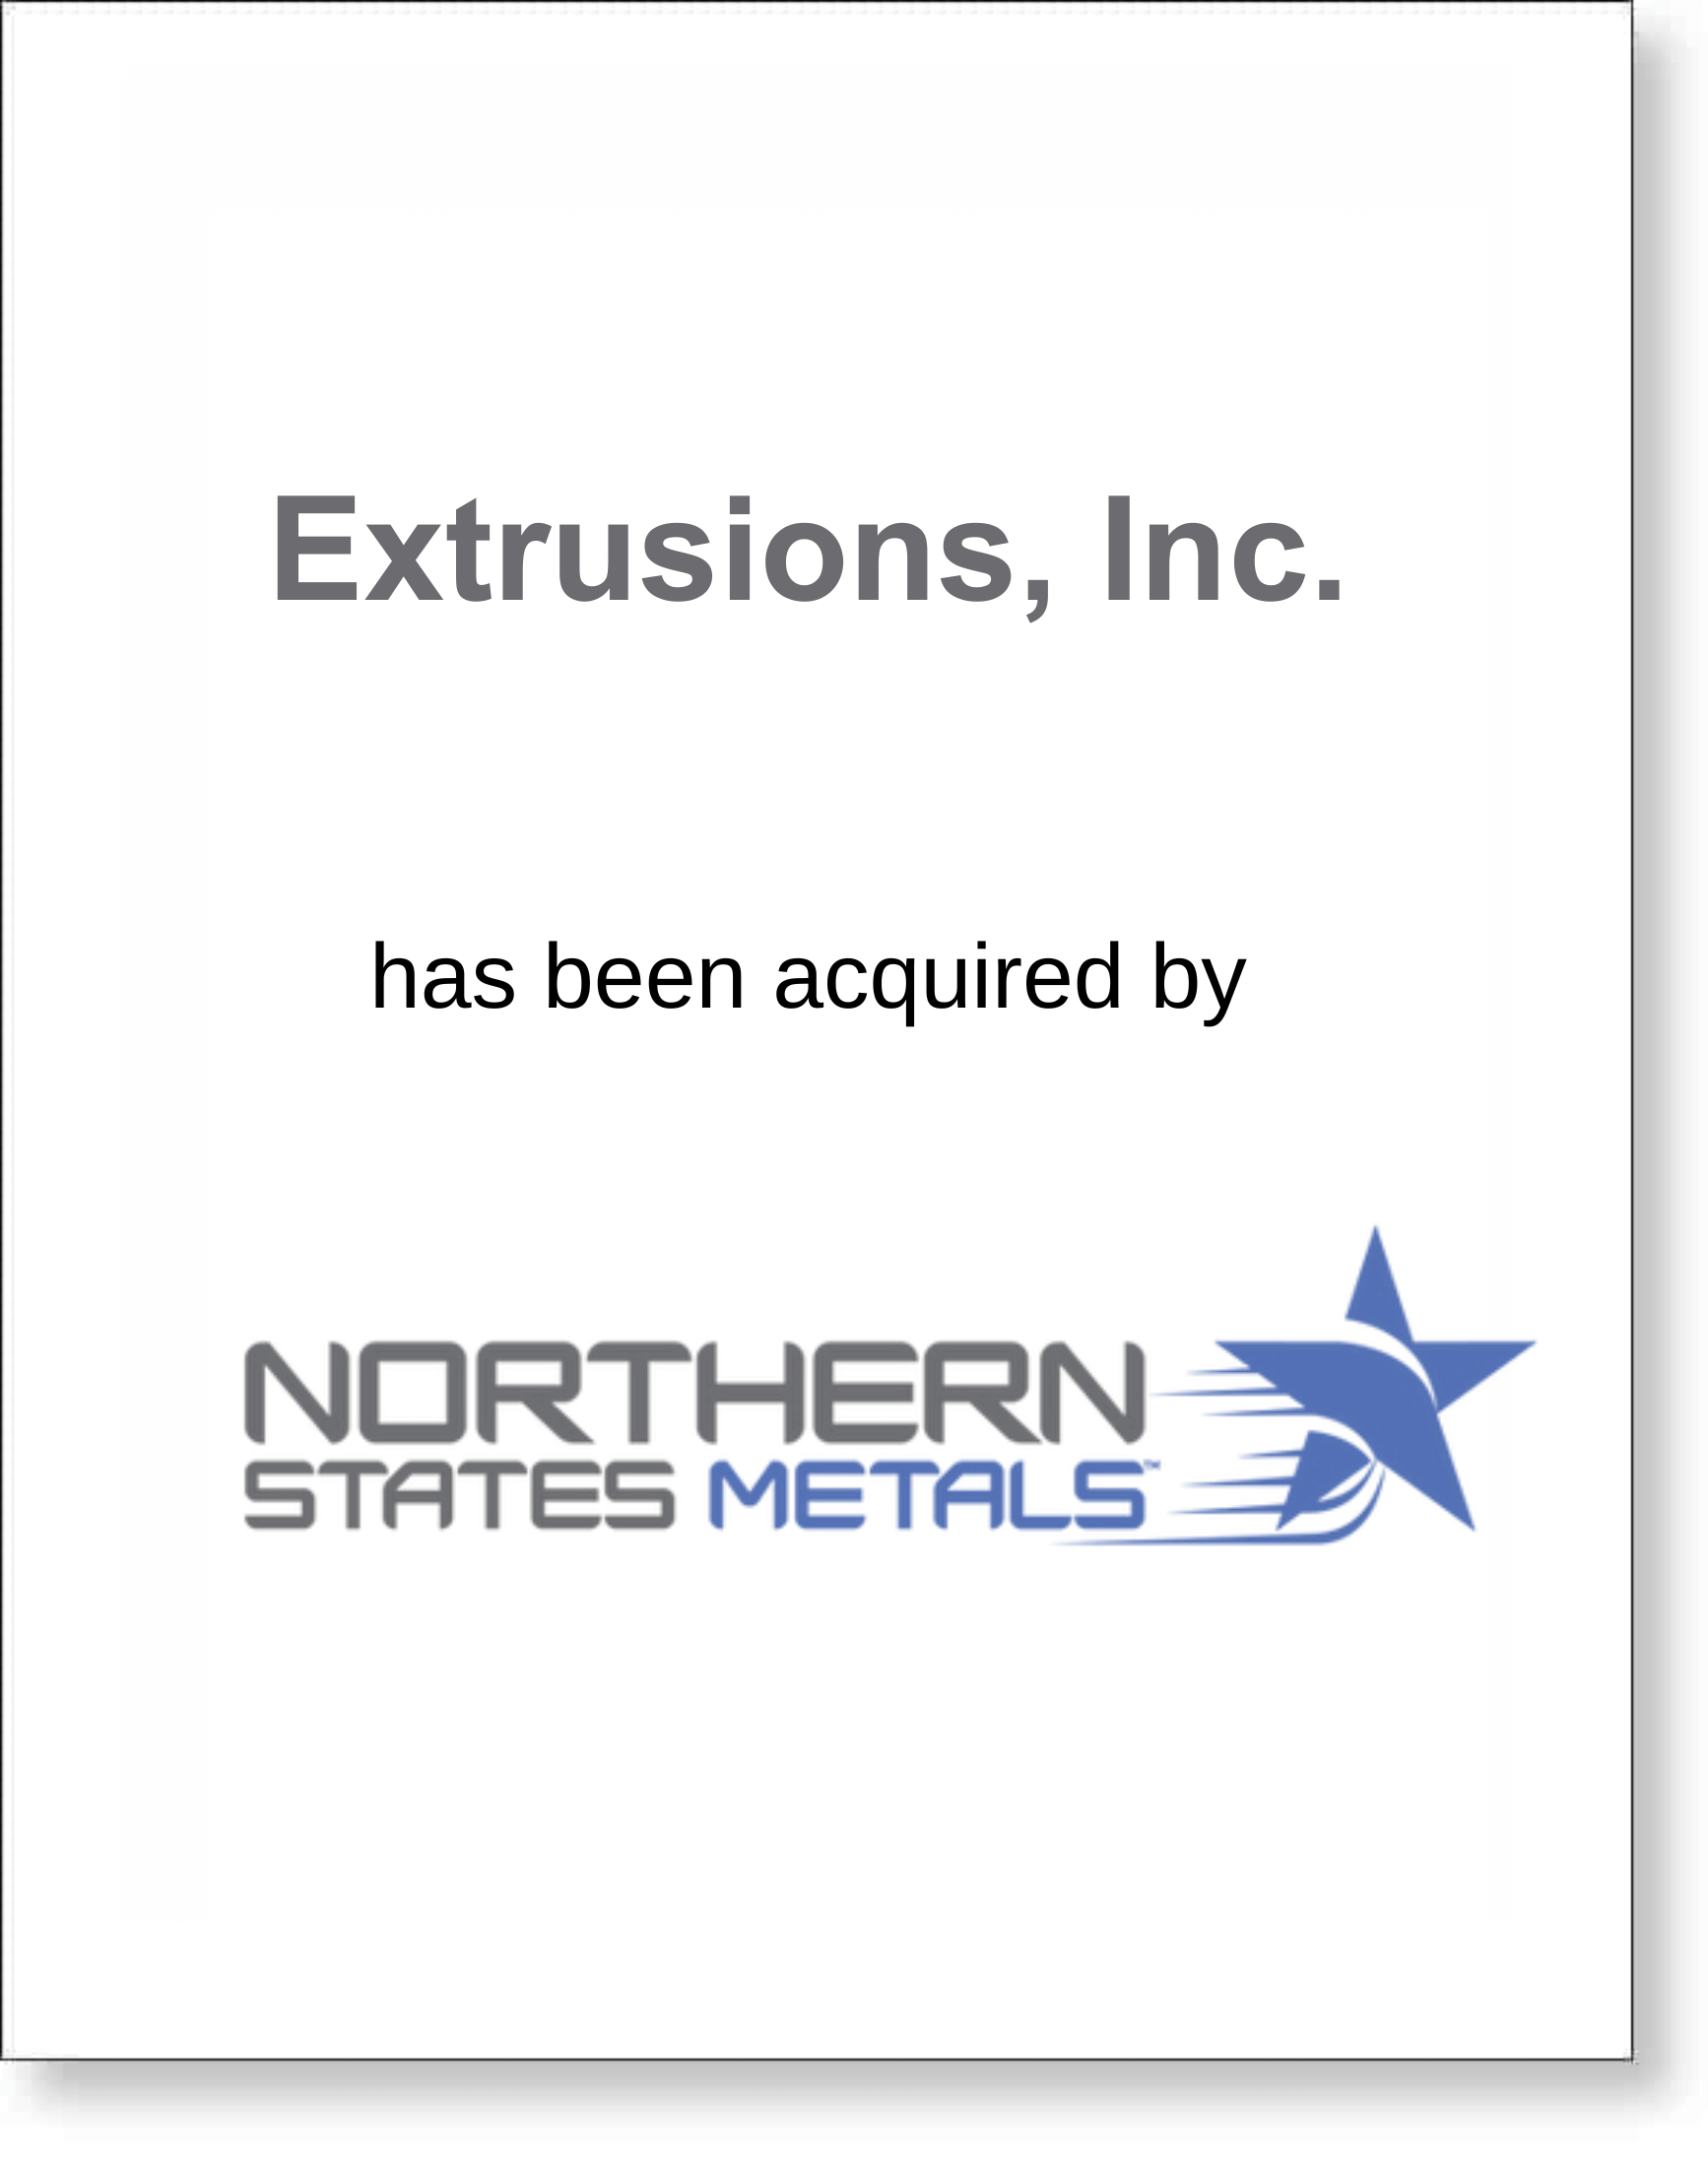 tombstone for the sale of extrusions, inc to northern states metals